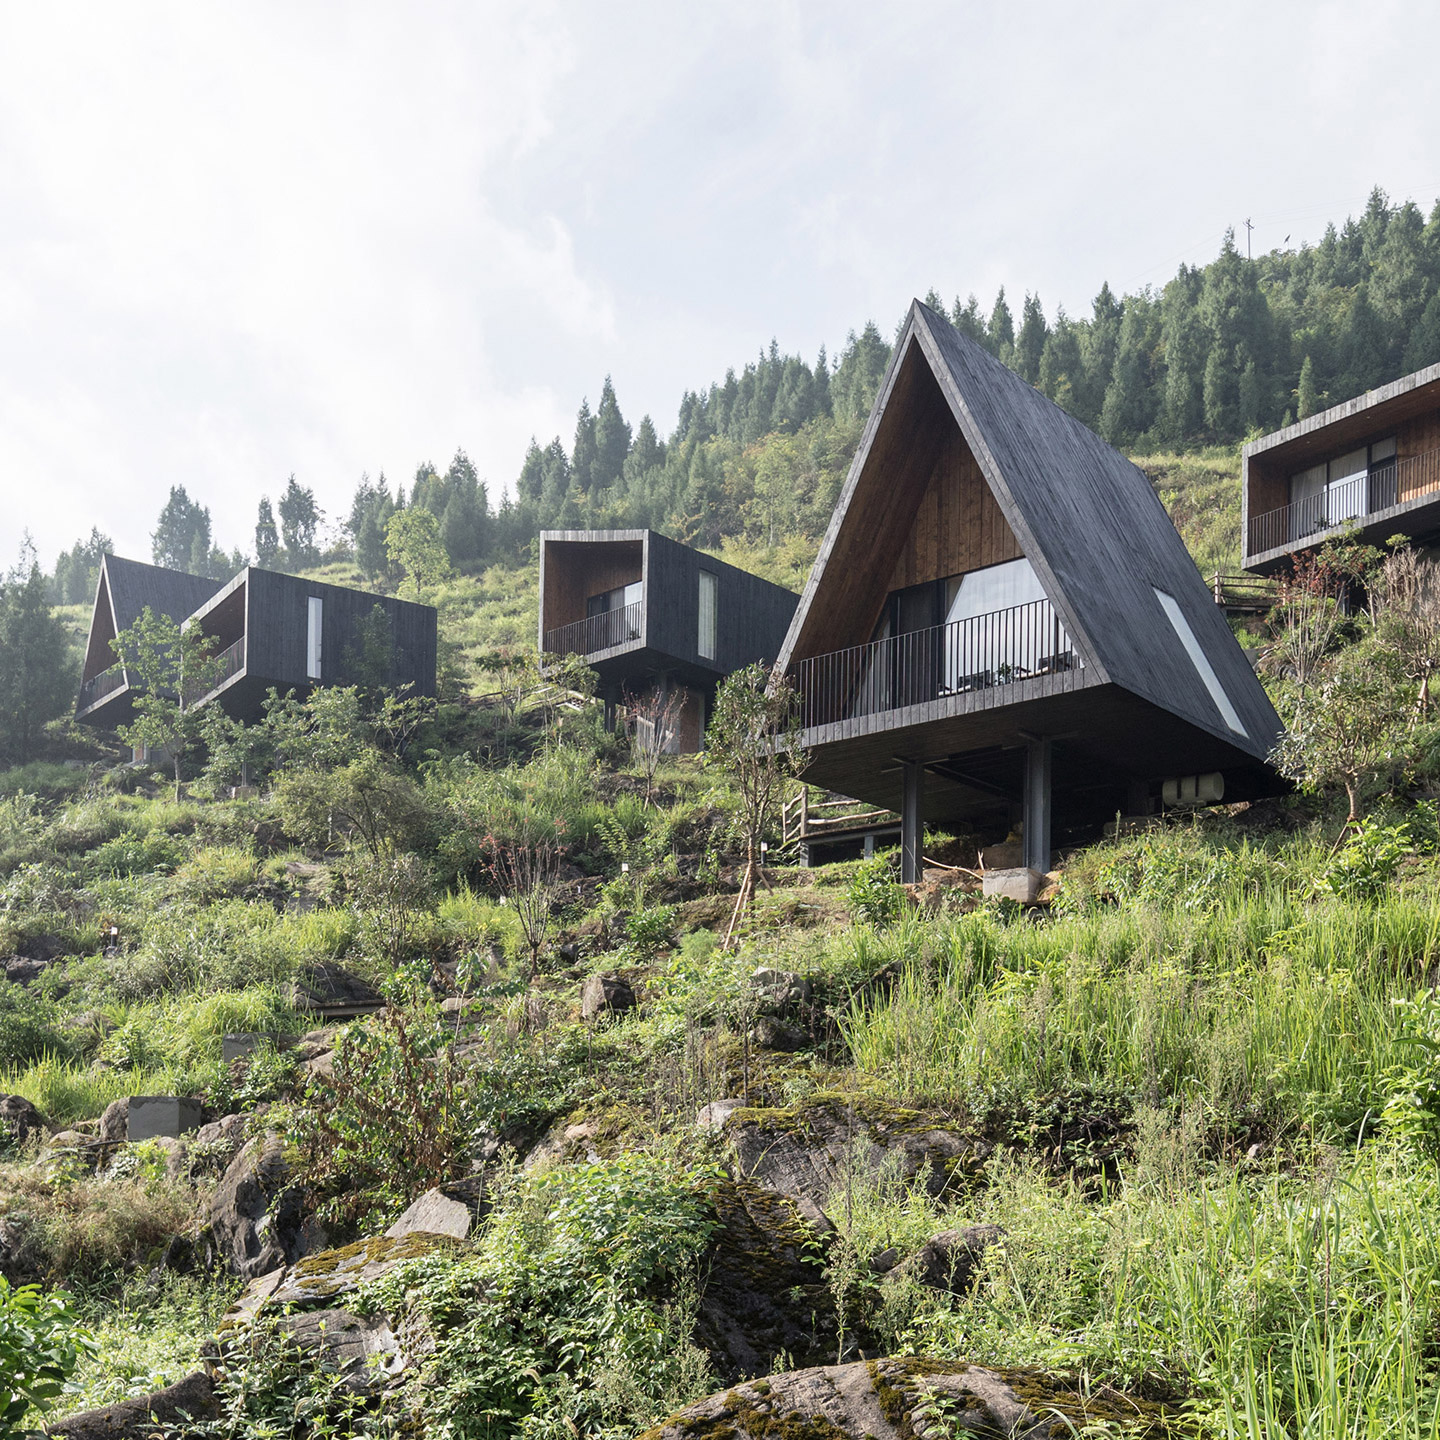 Dezeen's top 10 Chinese architecture projects of 2019: Woodhouse Hotel, Tuanjie, by ZJJZ Atelier